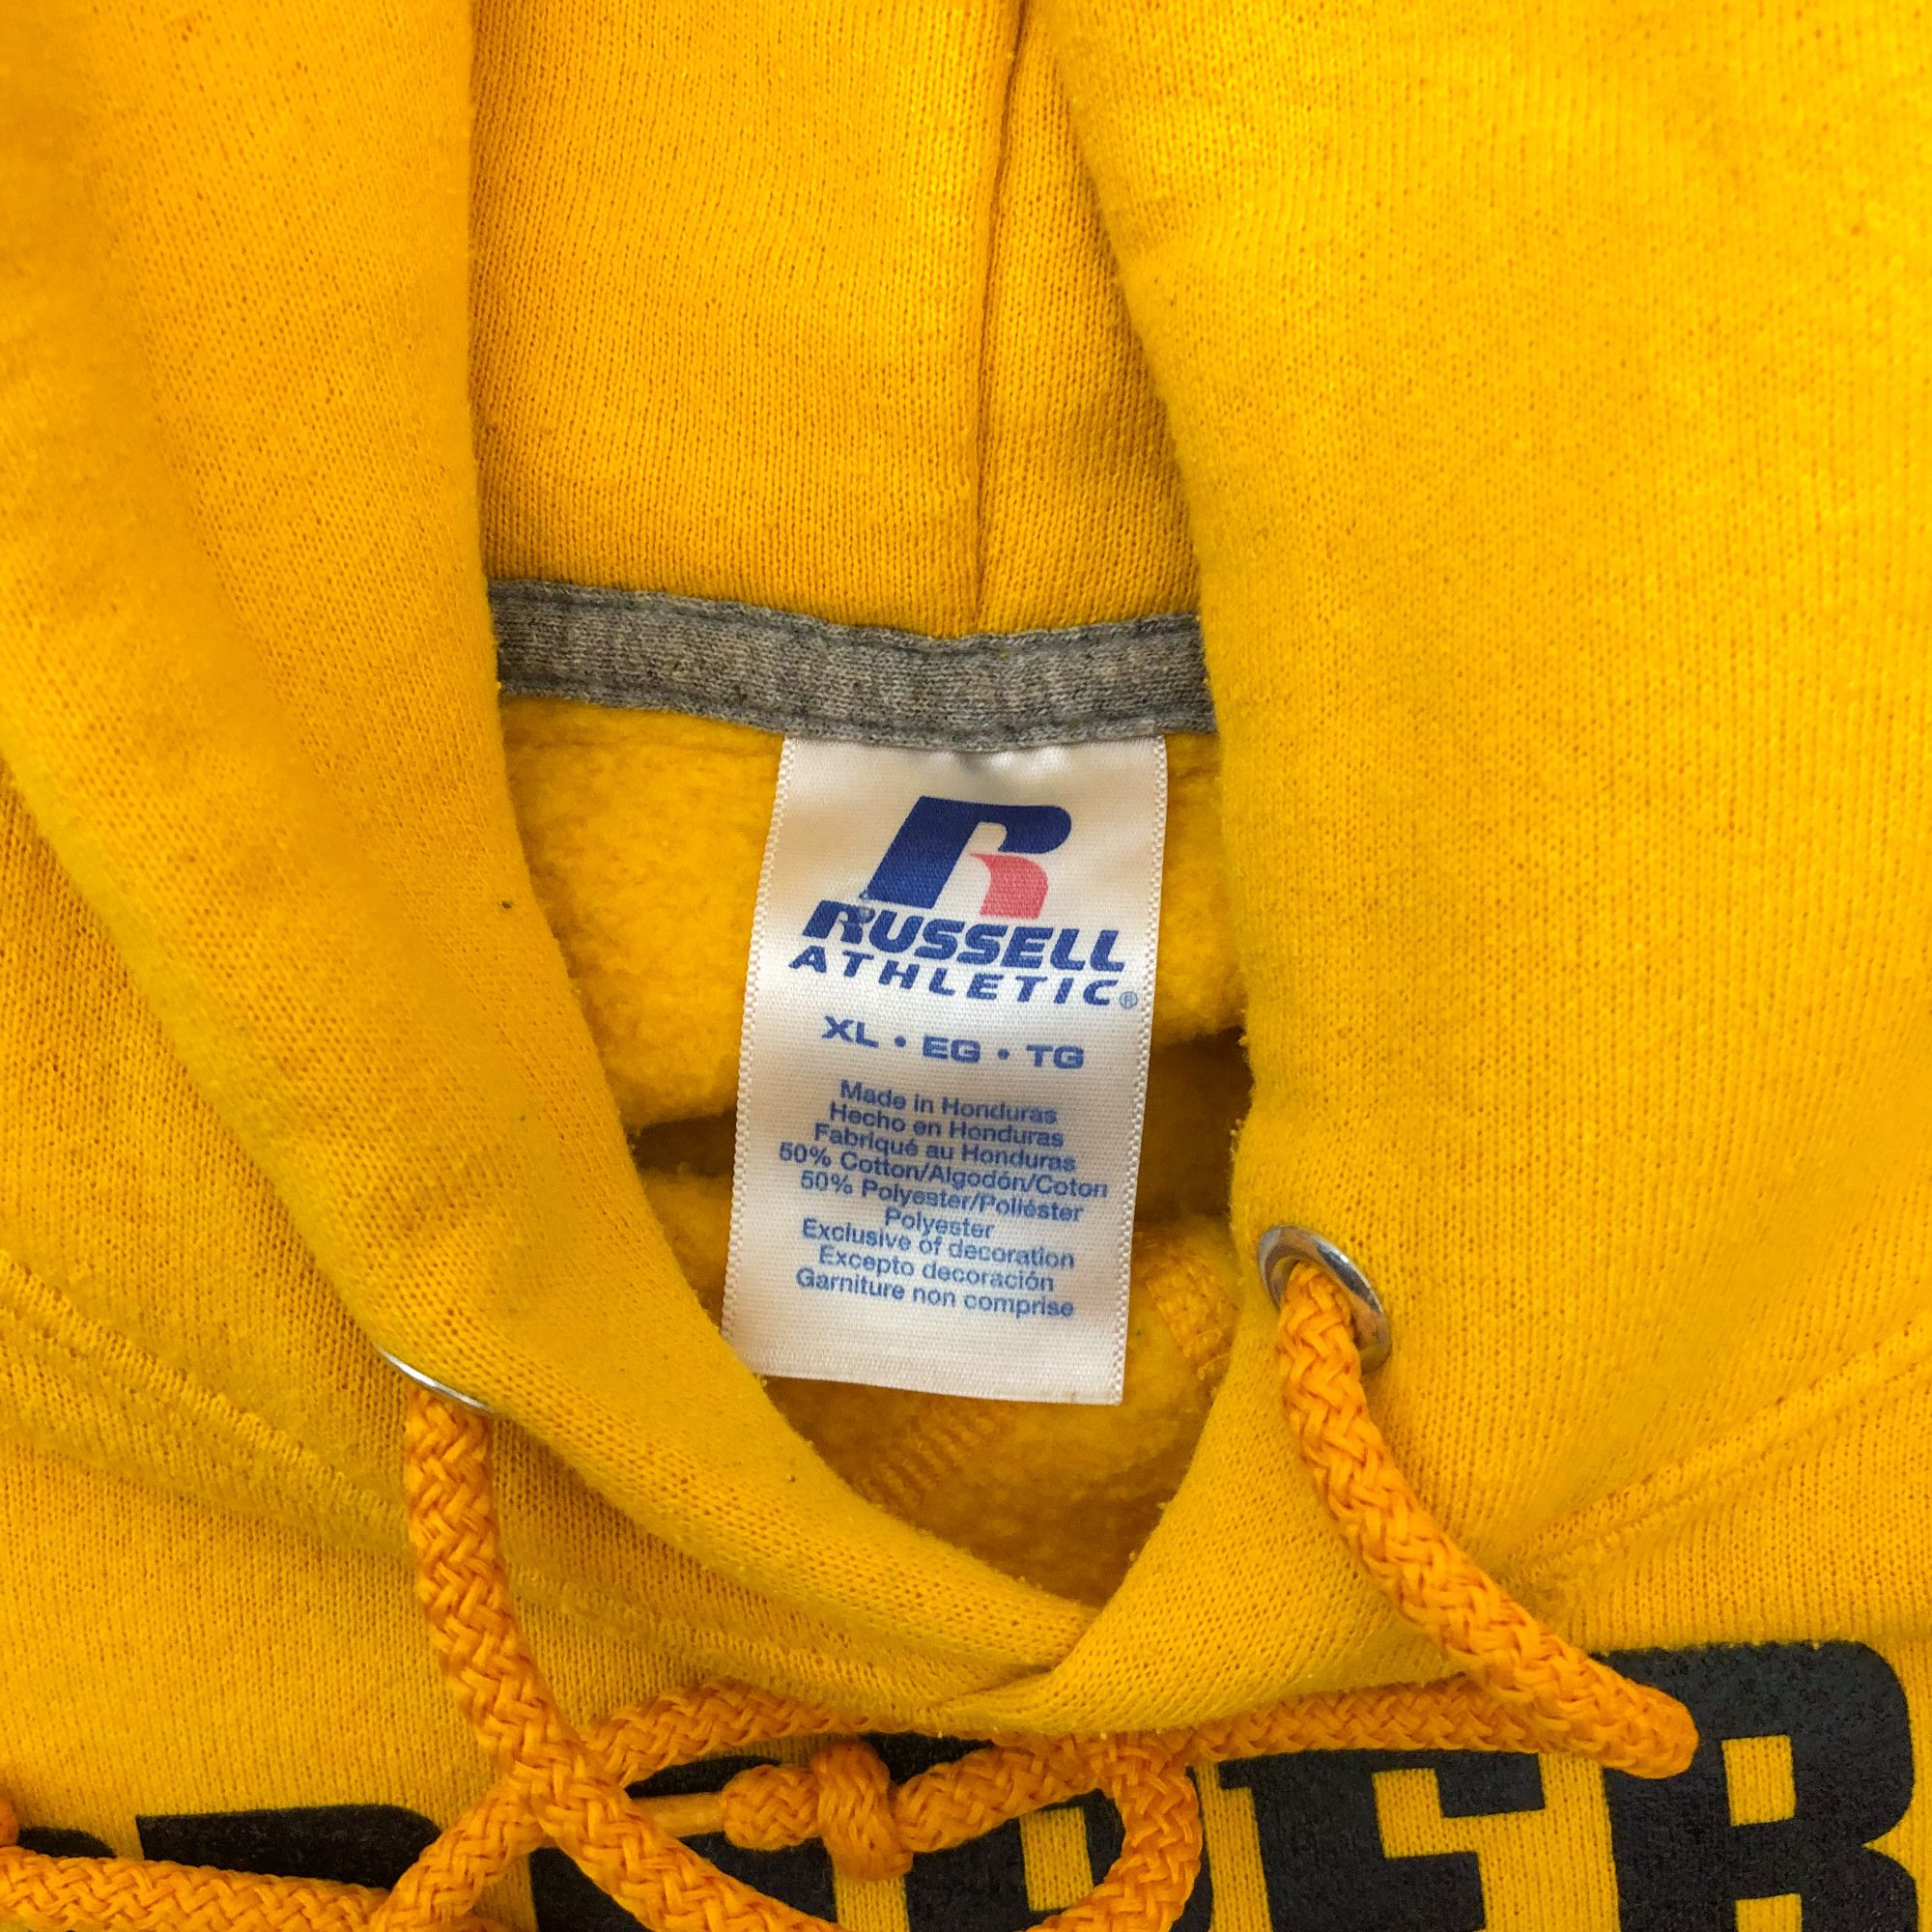 Russell Athletic 2000s Boxy 'Property of Panthers' Russell Athletic Hoodie Size US XL / EU 56 / 4 - 5 Thumbnail